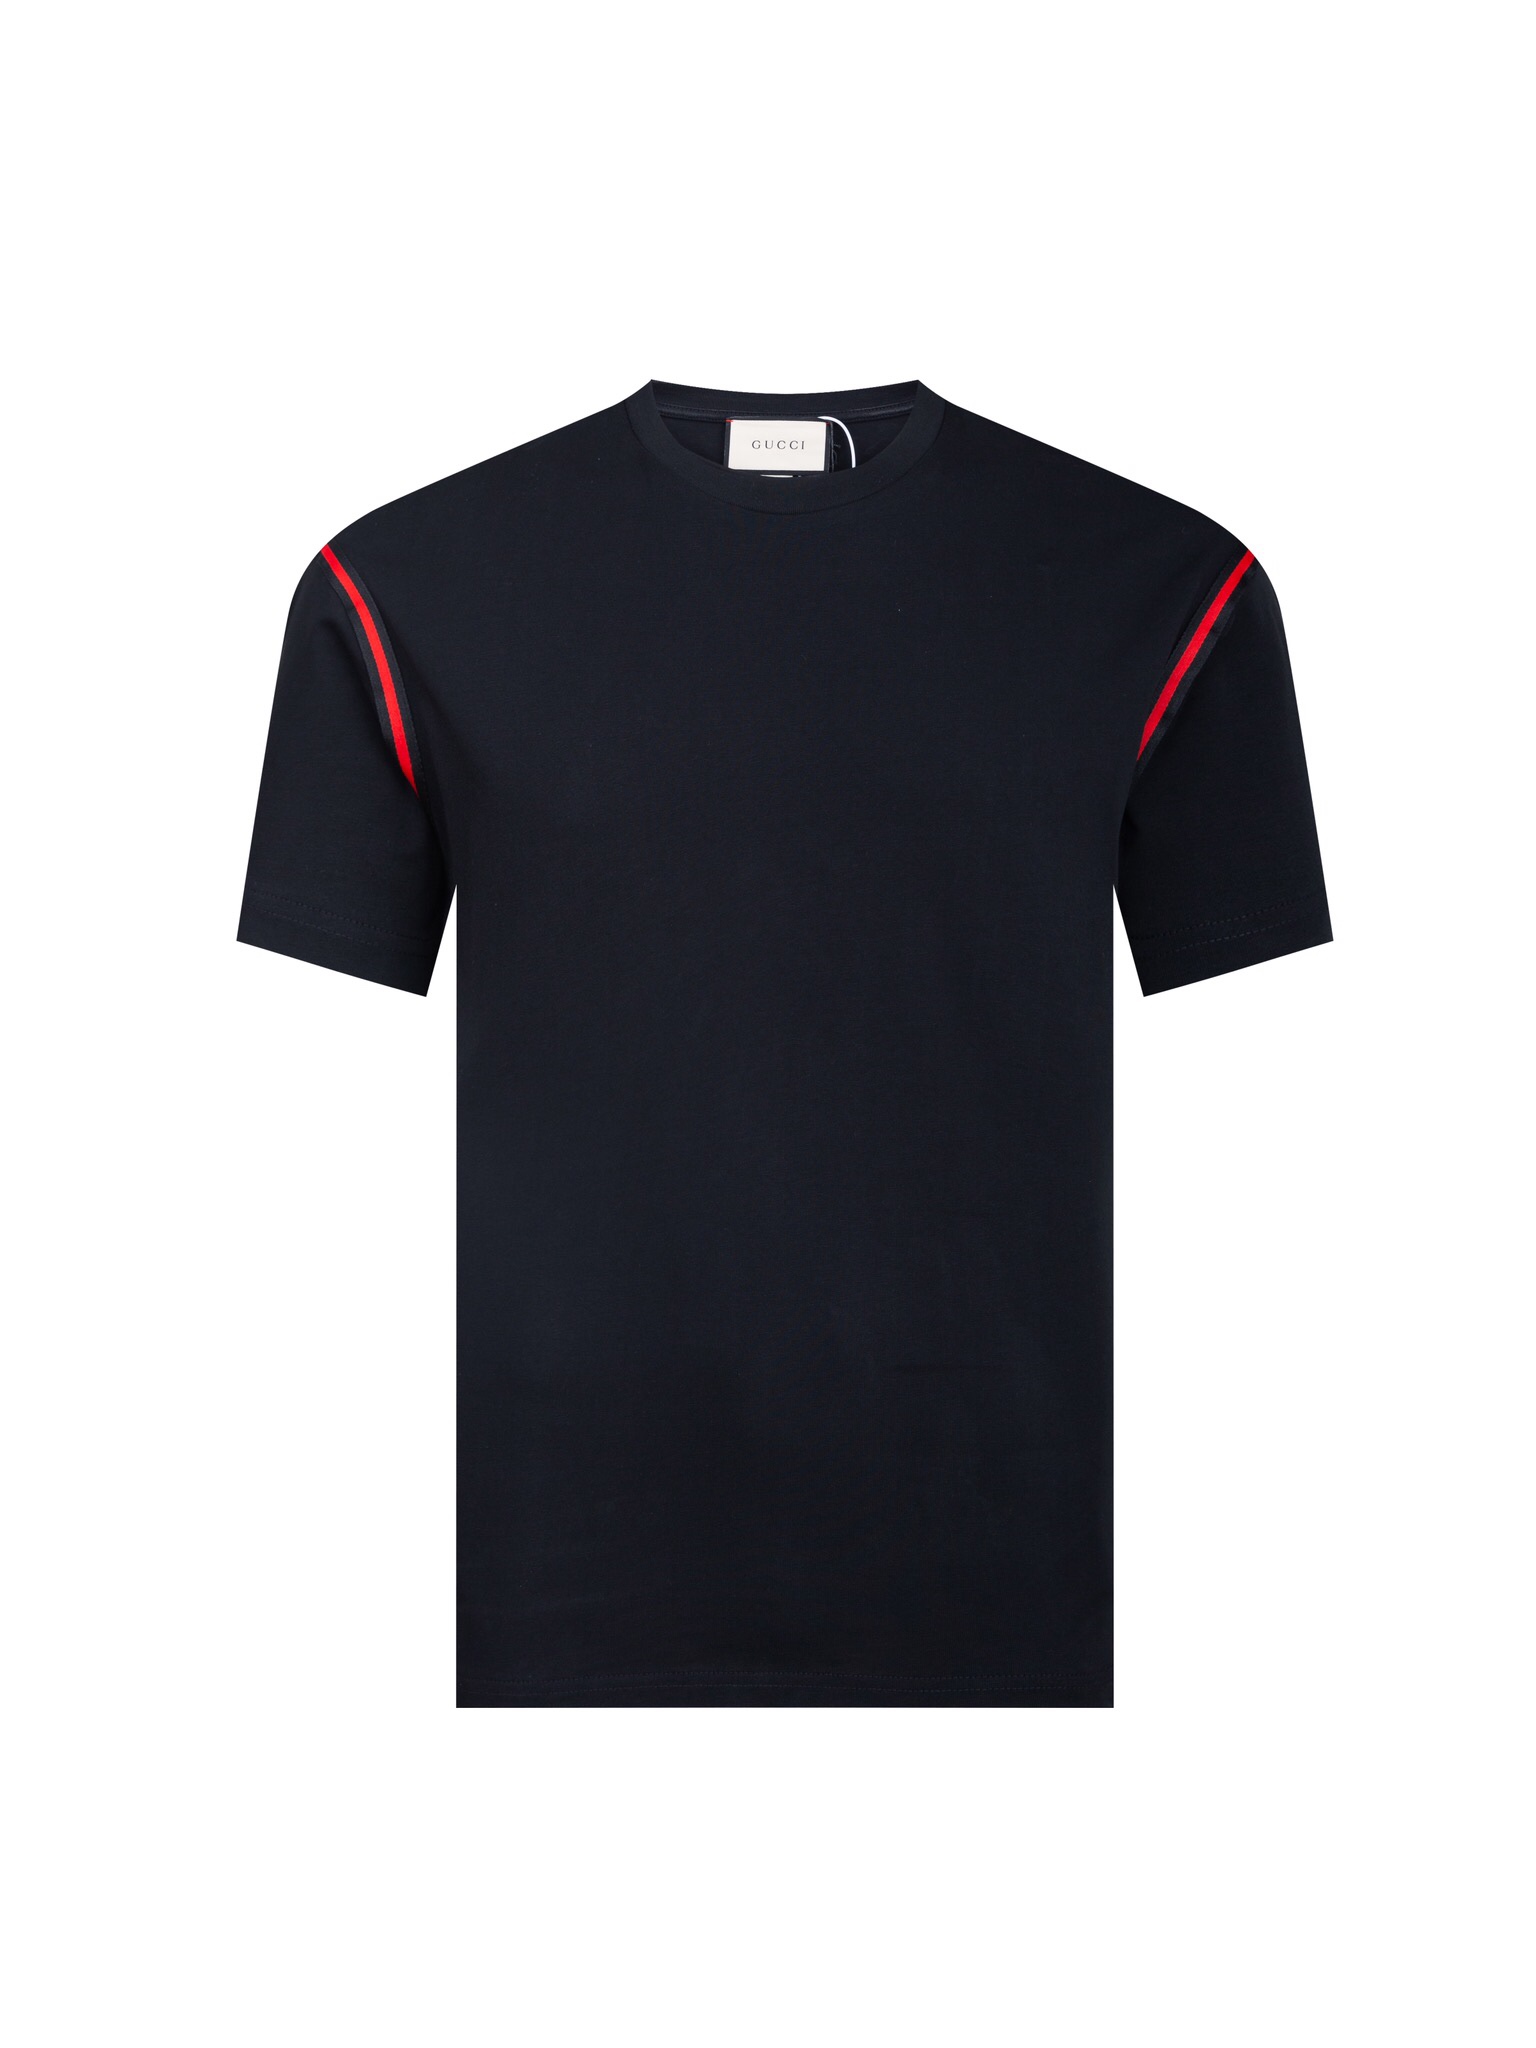 Gucci Clothing T-Shirt Black Green Grey Red White Embroidery Unisex Short Sleeve